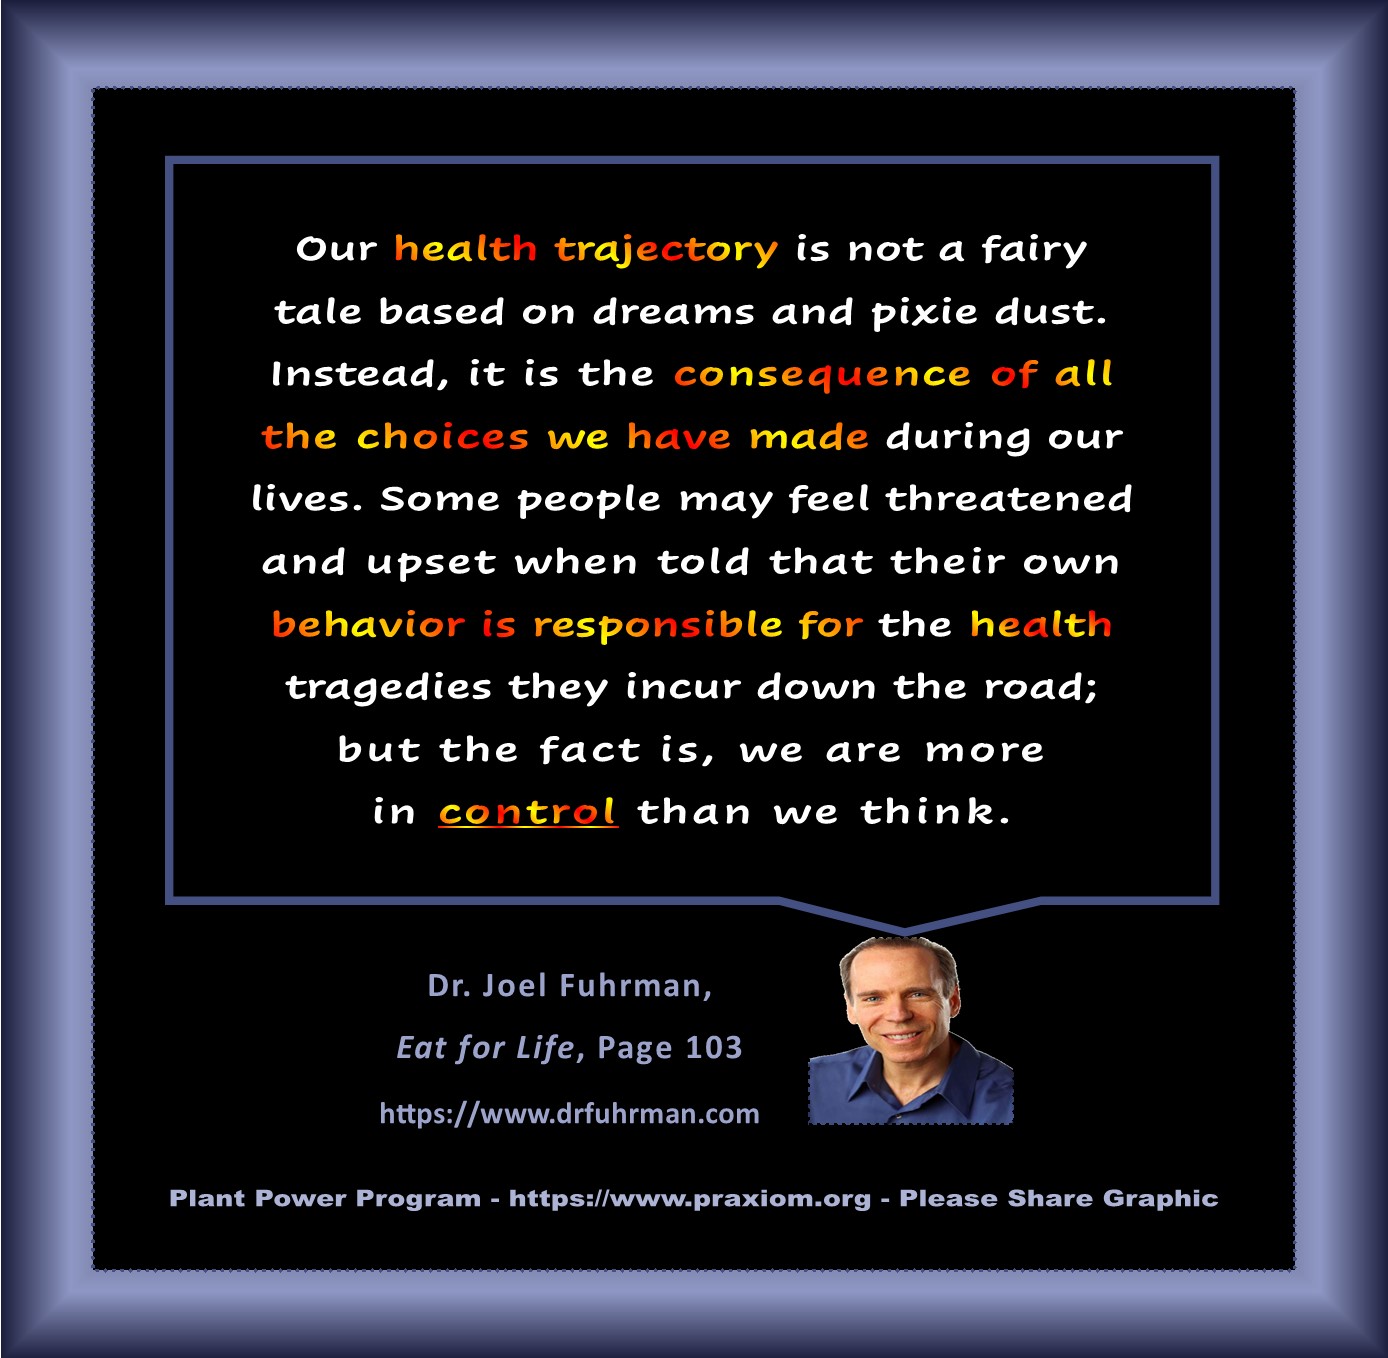 You are responsible for your own health - Dr. Joel Fuhrman